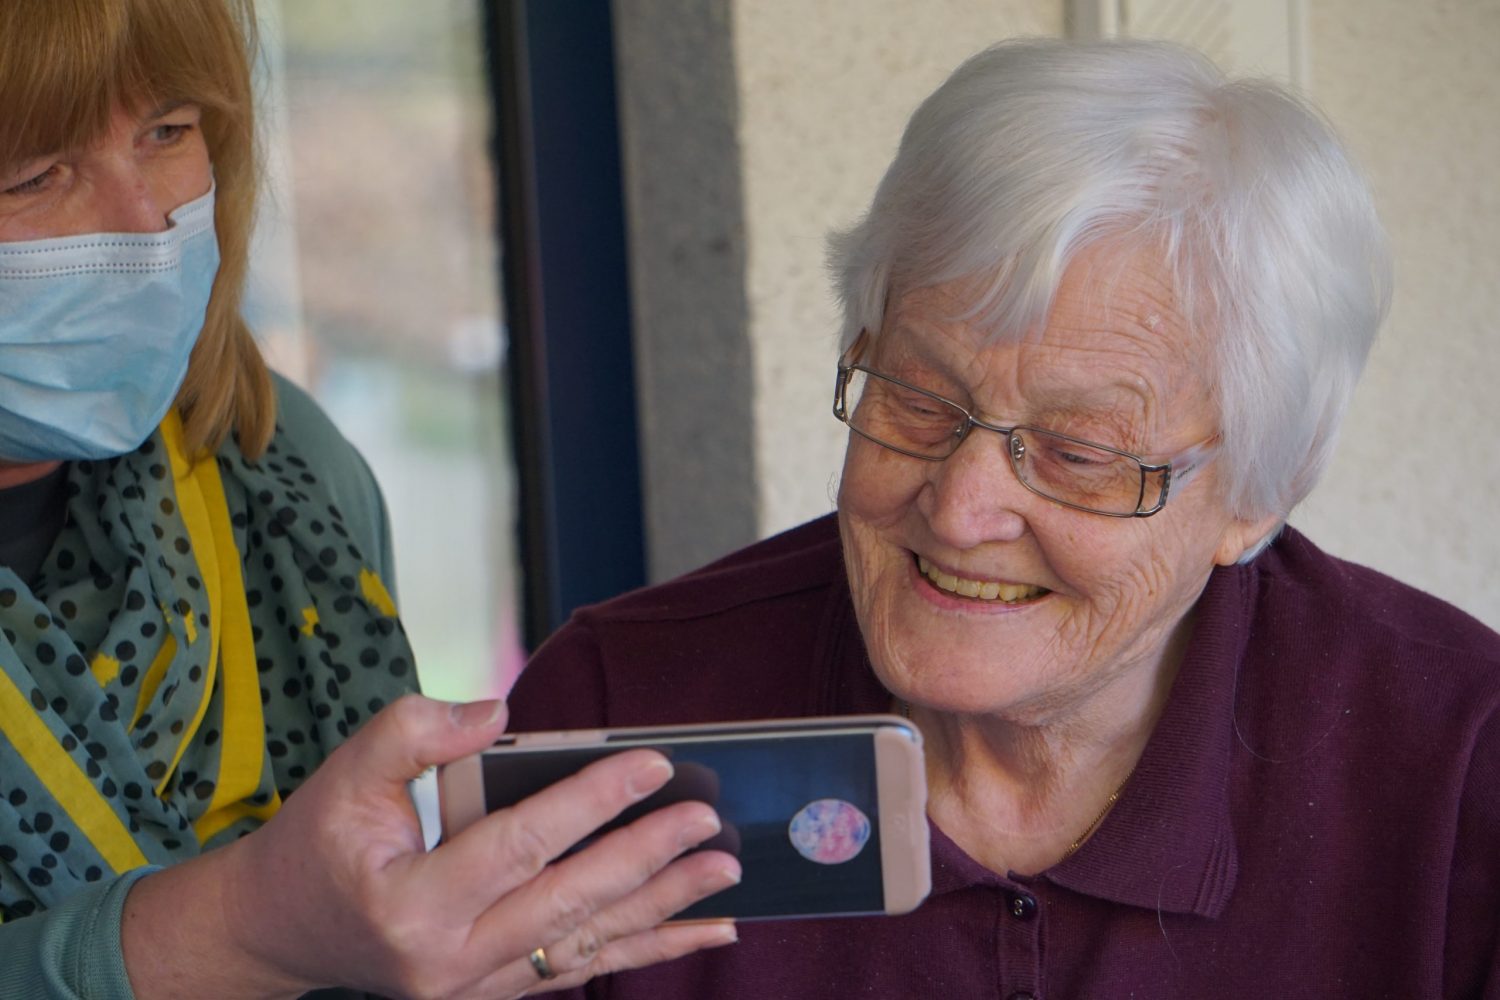 An elderly woman being shown something on a smartphone by a member of care staff wearing a face covering